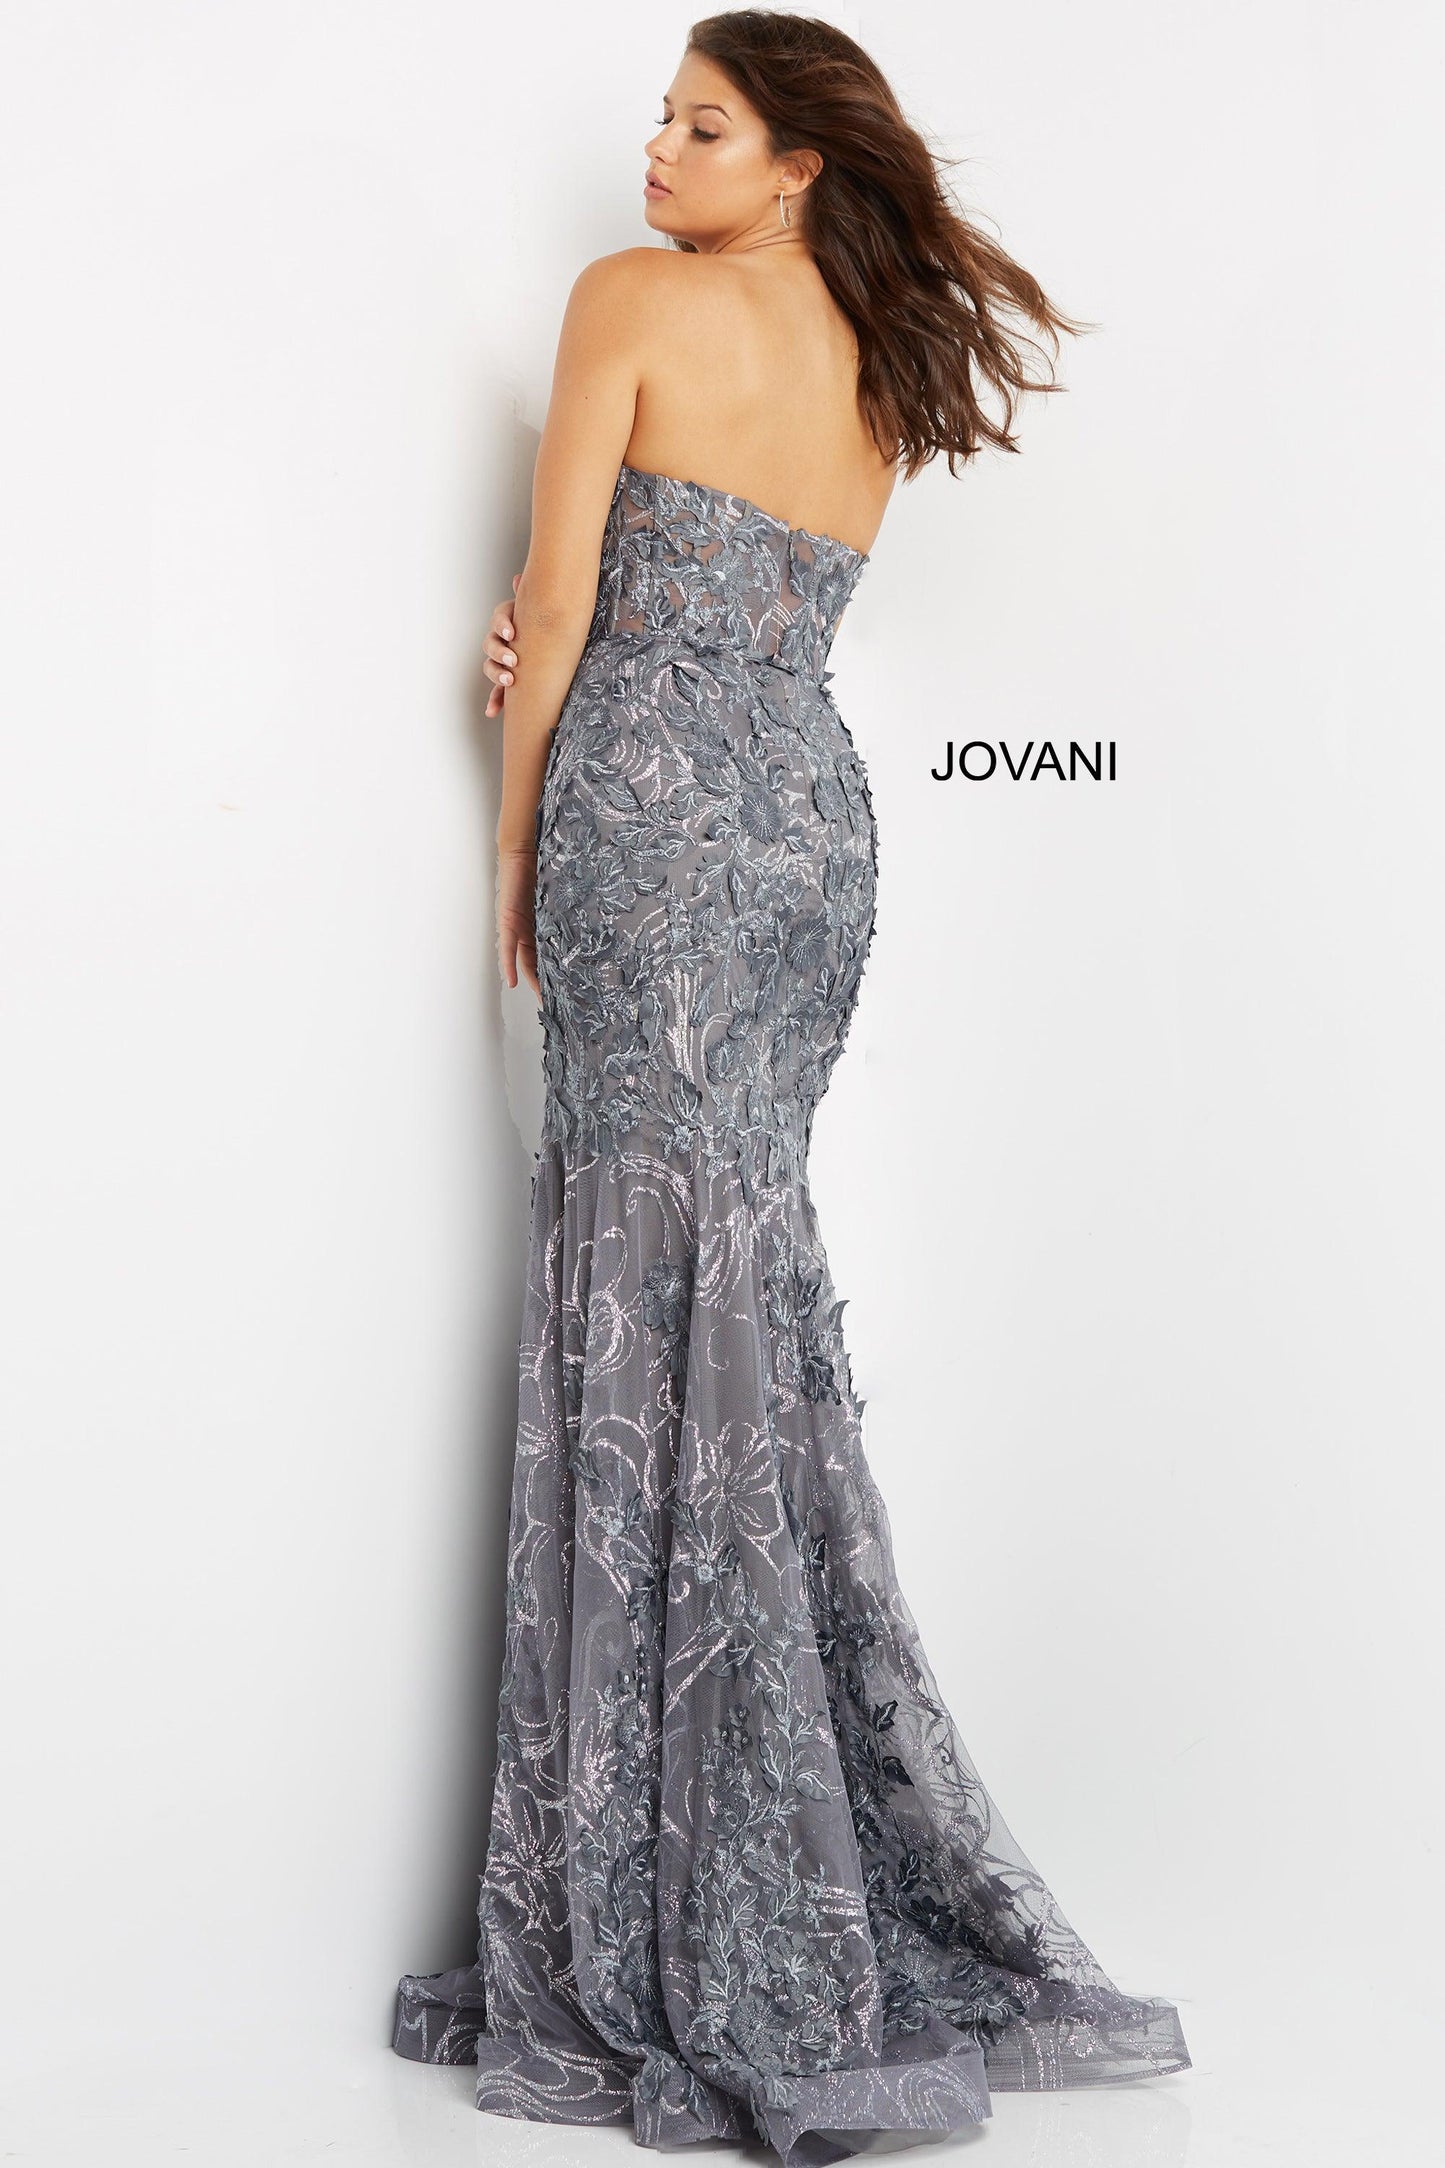 Jovani Strapless Sexy Long Prom Dress 07935 - The Dress Outlet